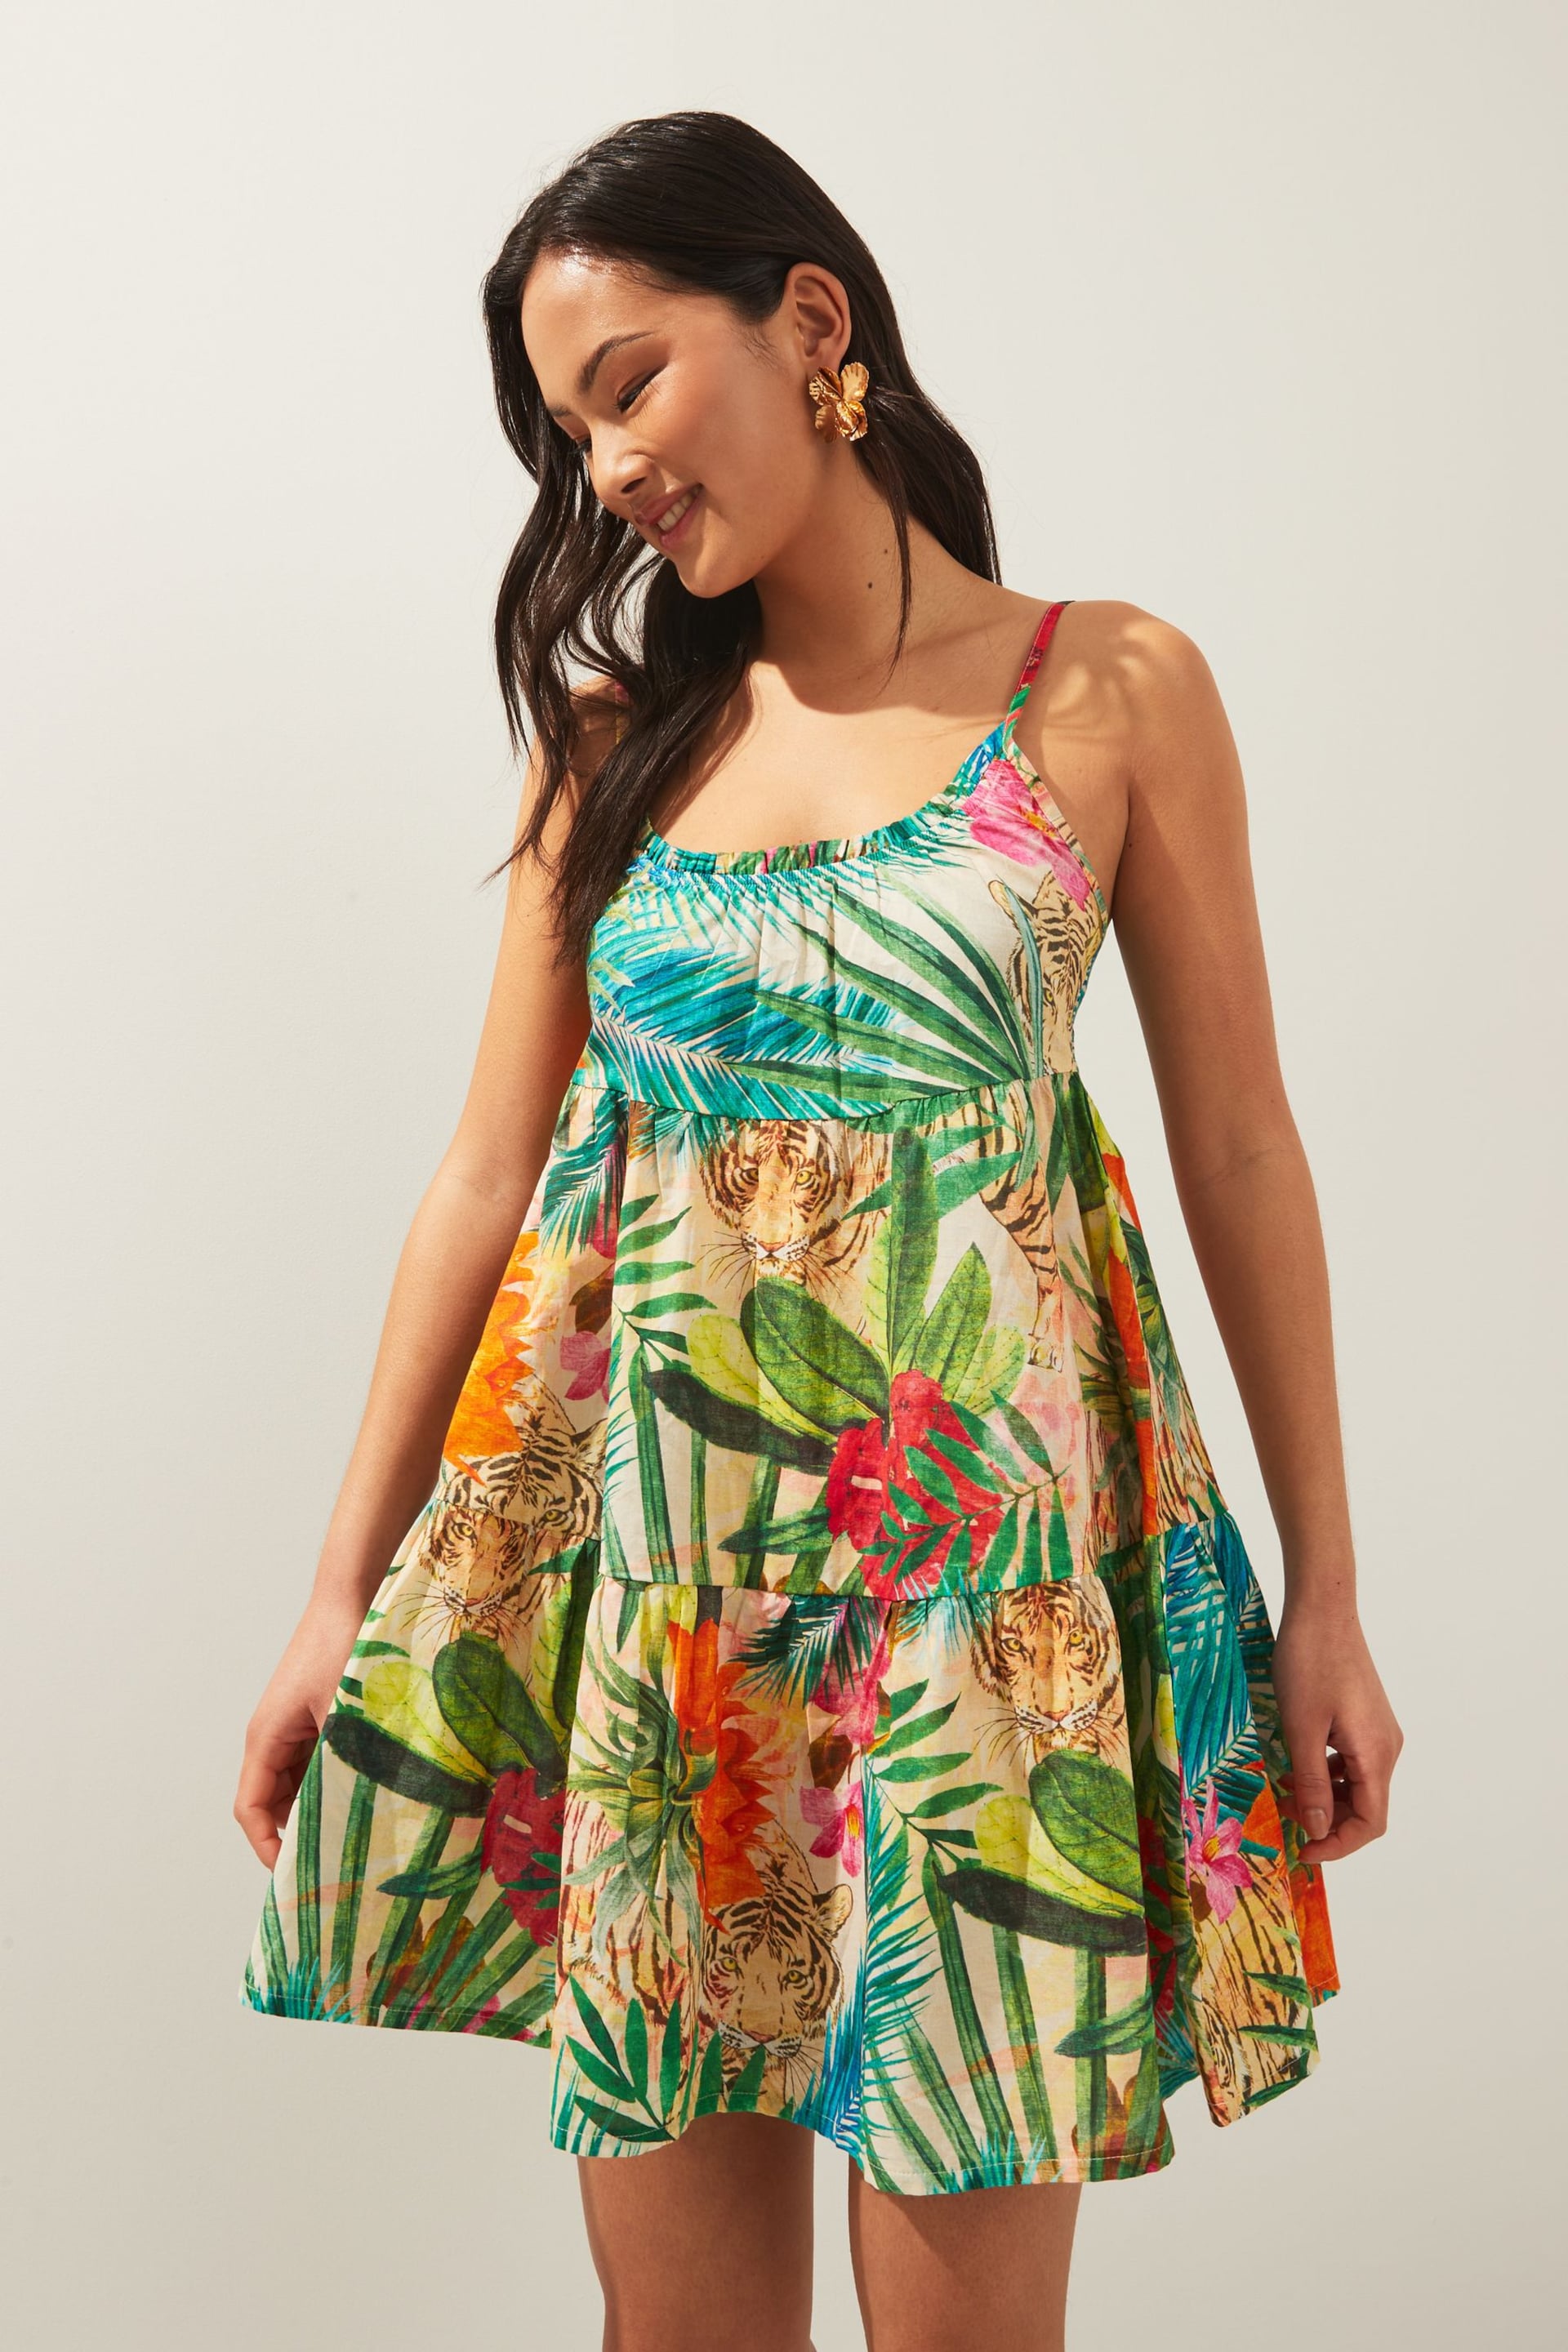 Tropical Mini Tiered Summer Cotton Dress - Image 1 of 3